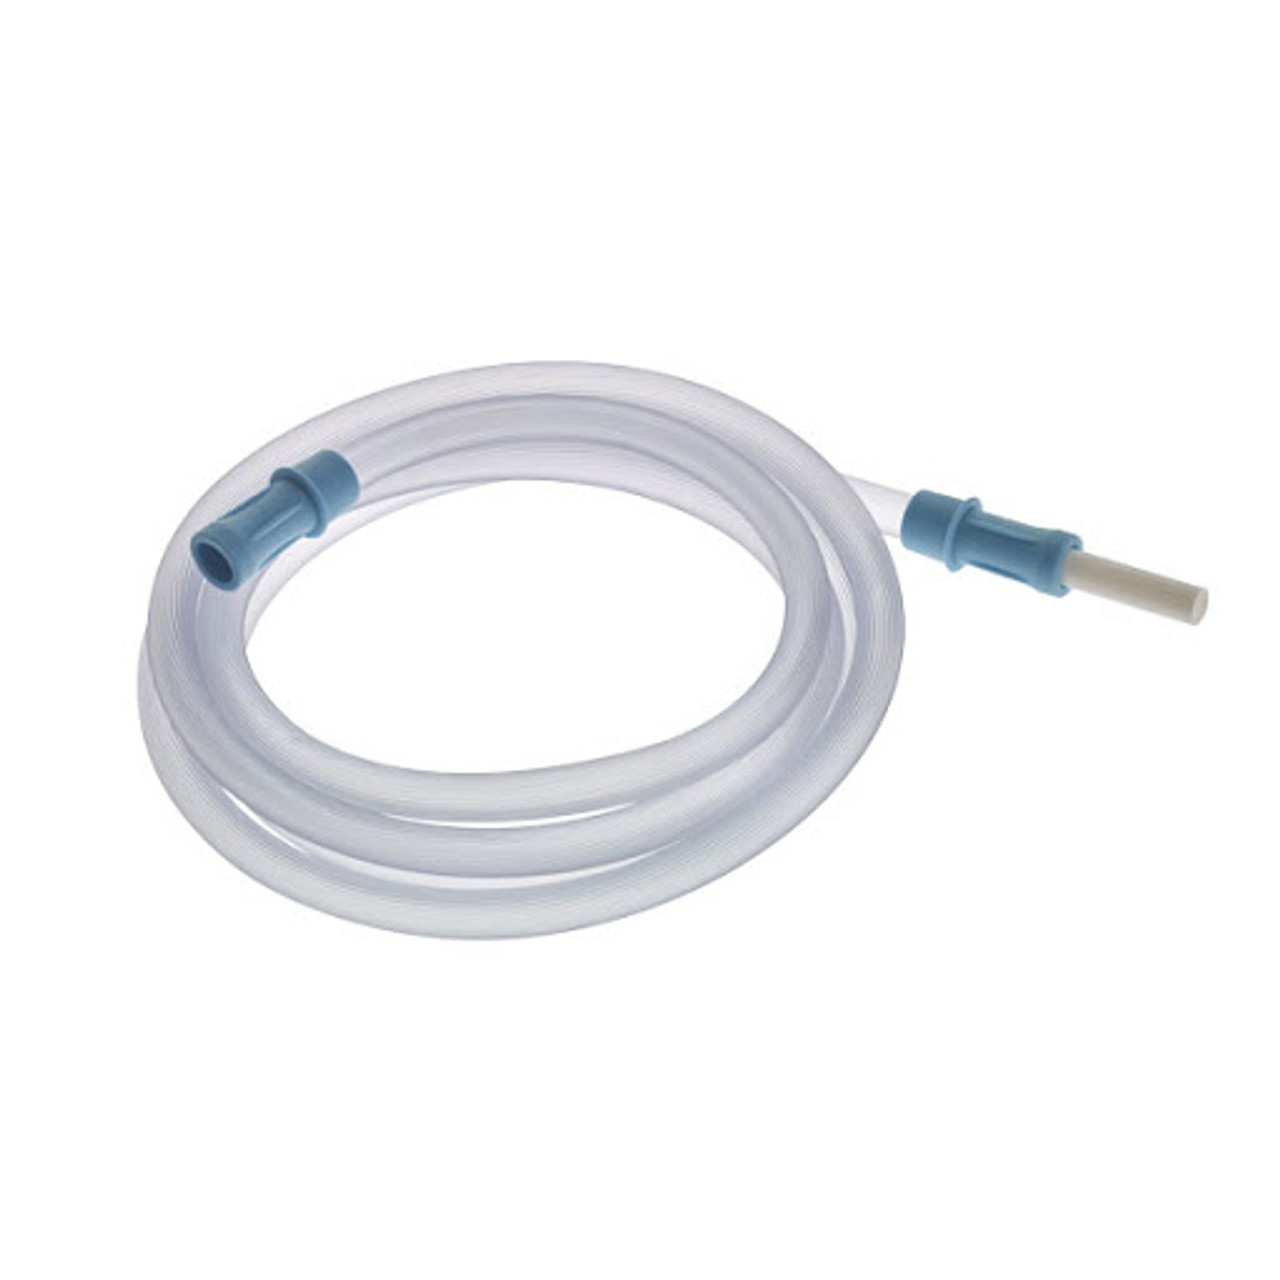 Medi-Vac® Suction Tubing With Connector 1/4" x 10'